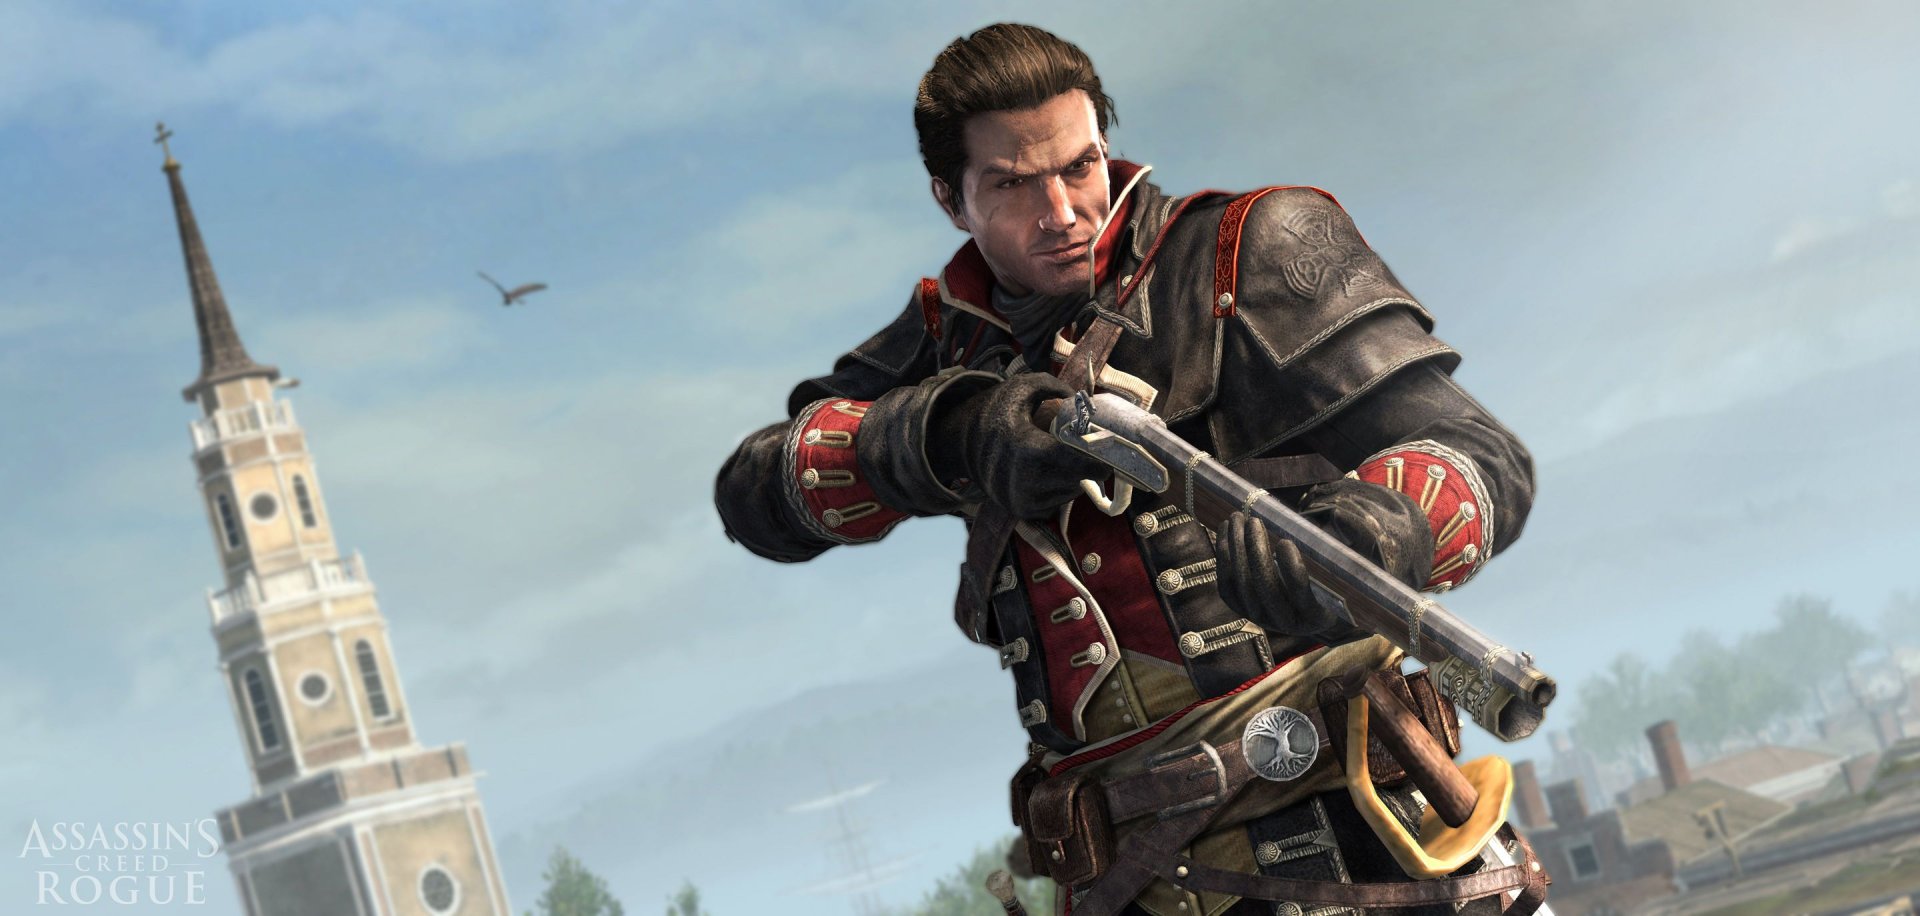 Video Game Assassin's Creed: Rogue HD Wallpaper | Background Image